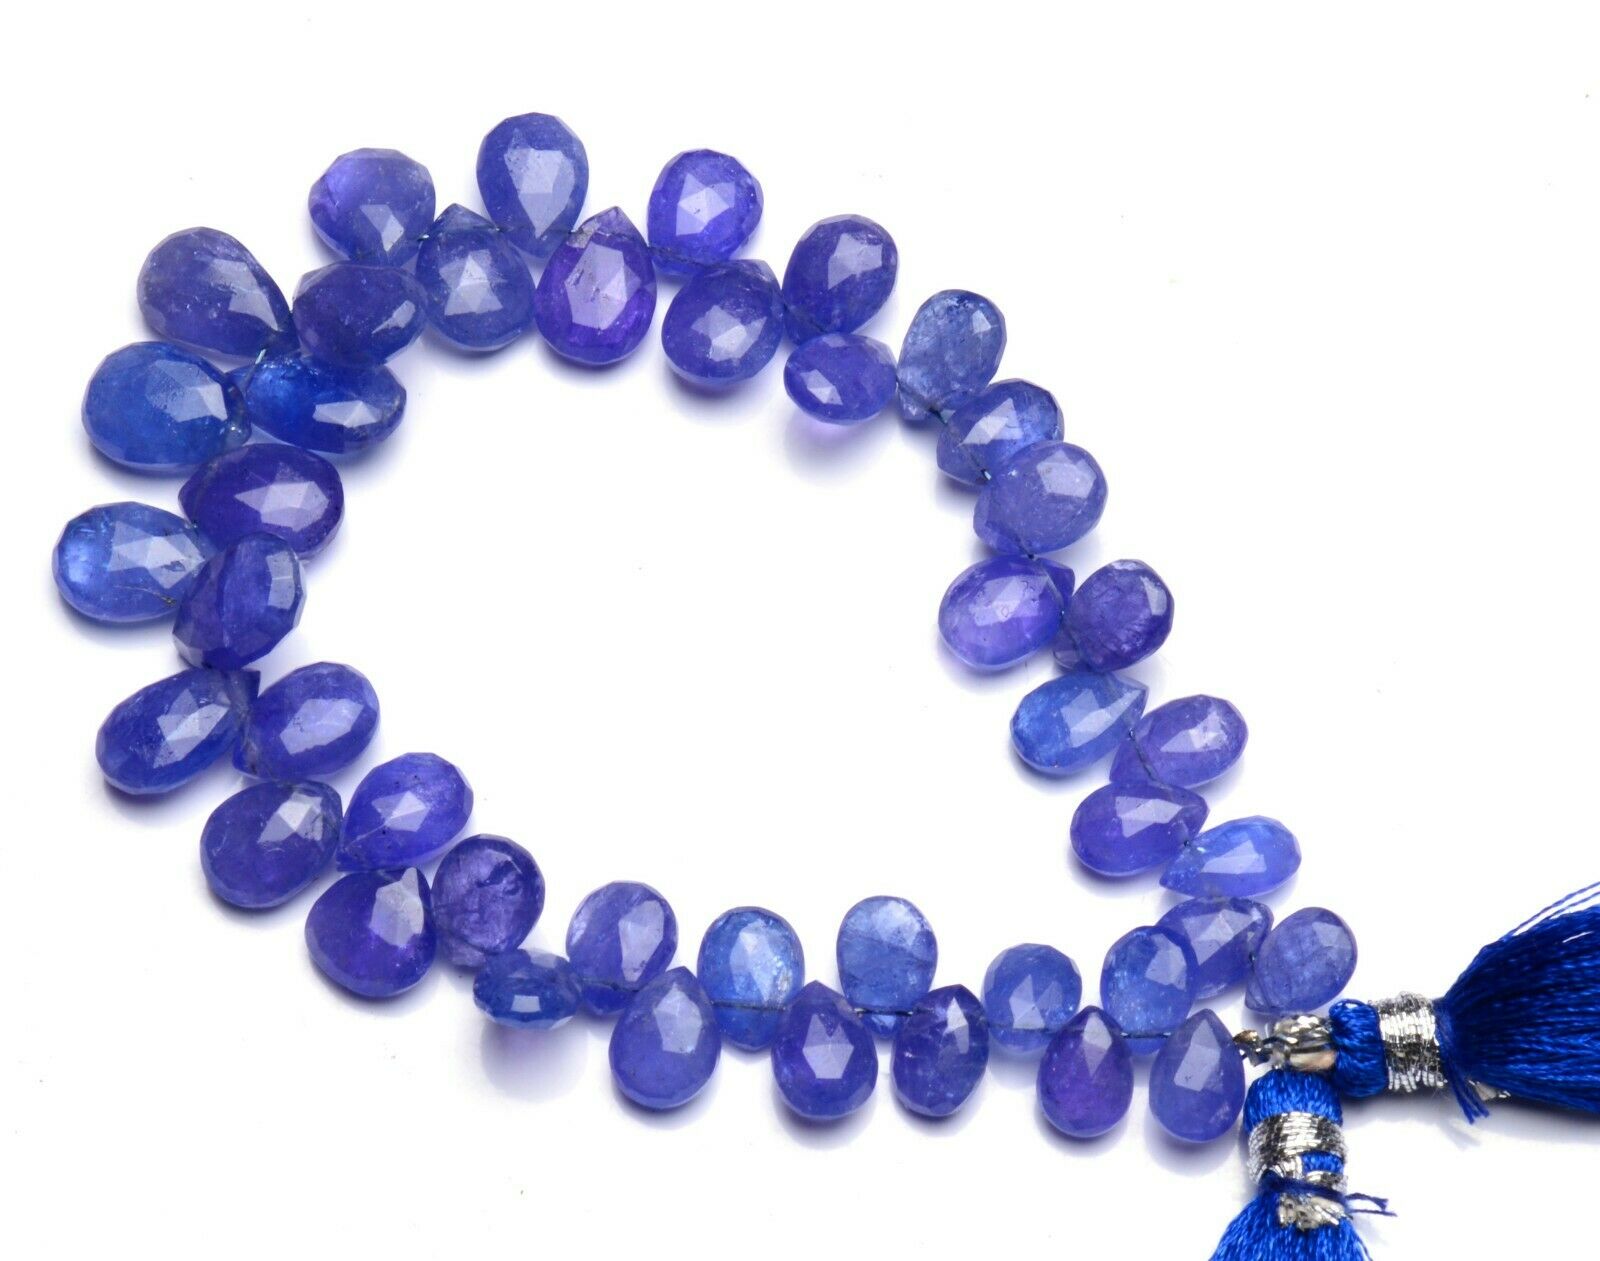 Natural Tanzanite Gem Faceted 7x5 To 11x7mm Size Pear Shape Beads Strand 7 Inch